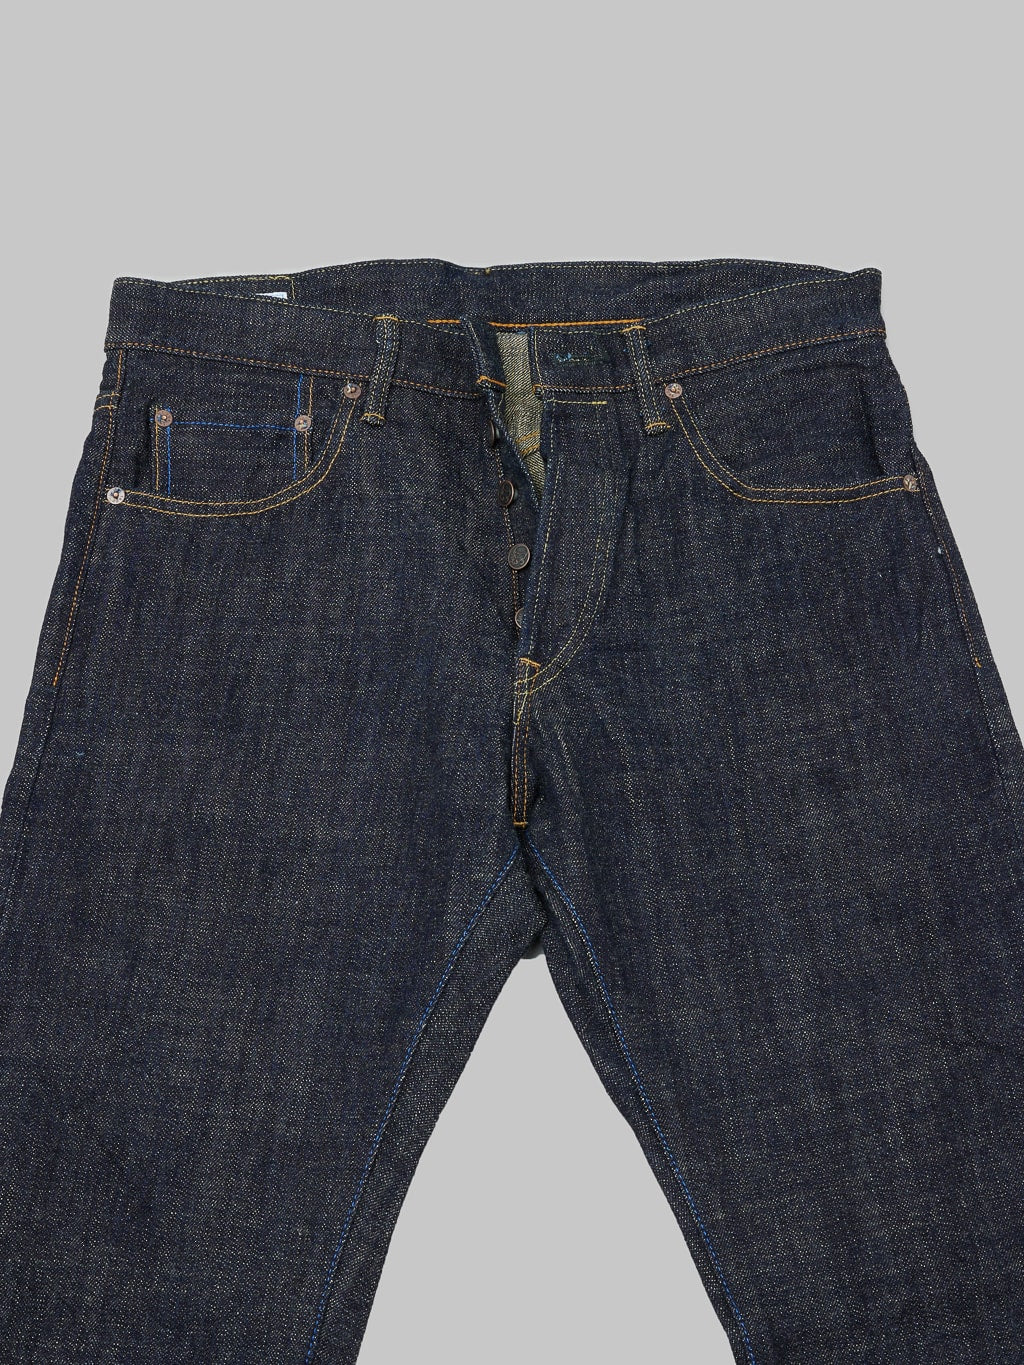 Tanuki Zetto Benkei High Tapered Jeans front view details